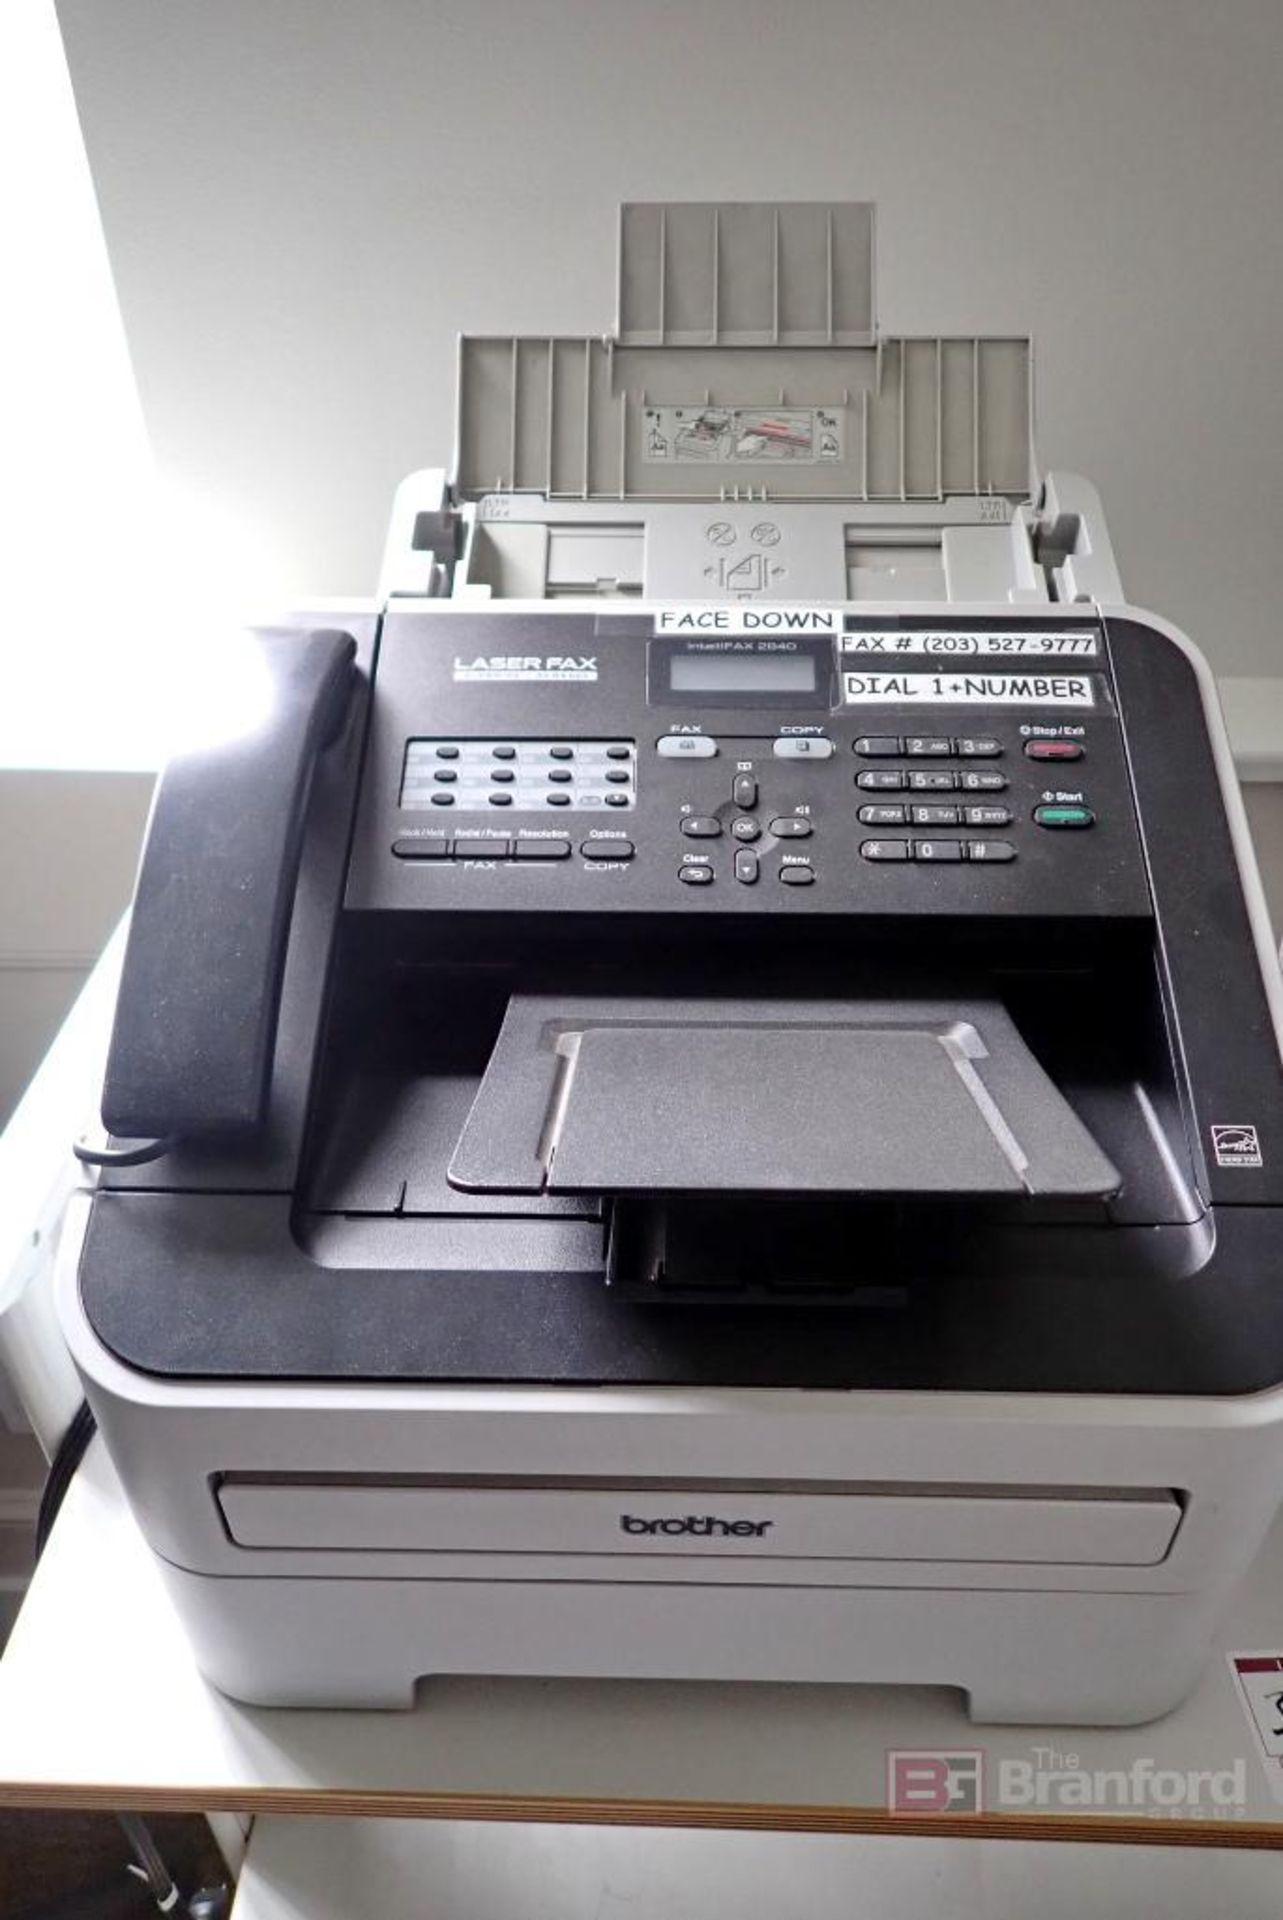 Brother IntelliFAX 2940 Fax w/ DR-420 Drum Unit & Cart - Image 2 of 3